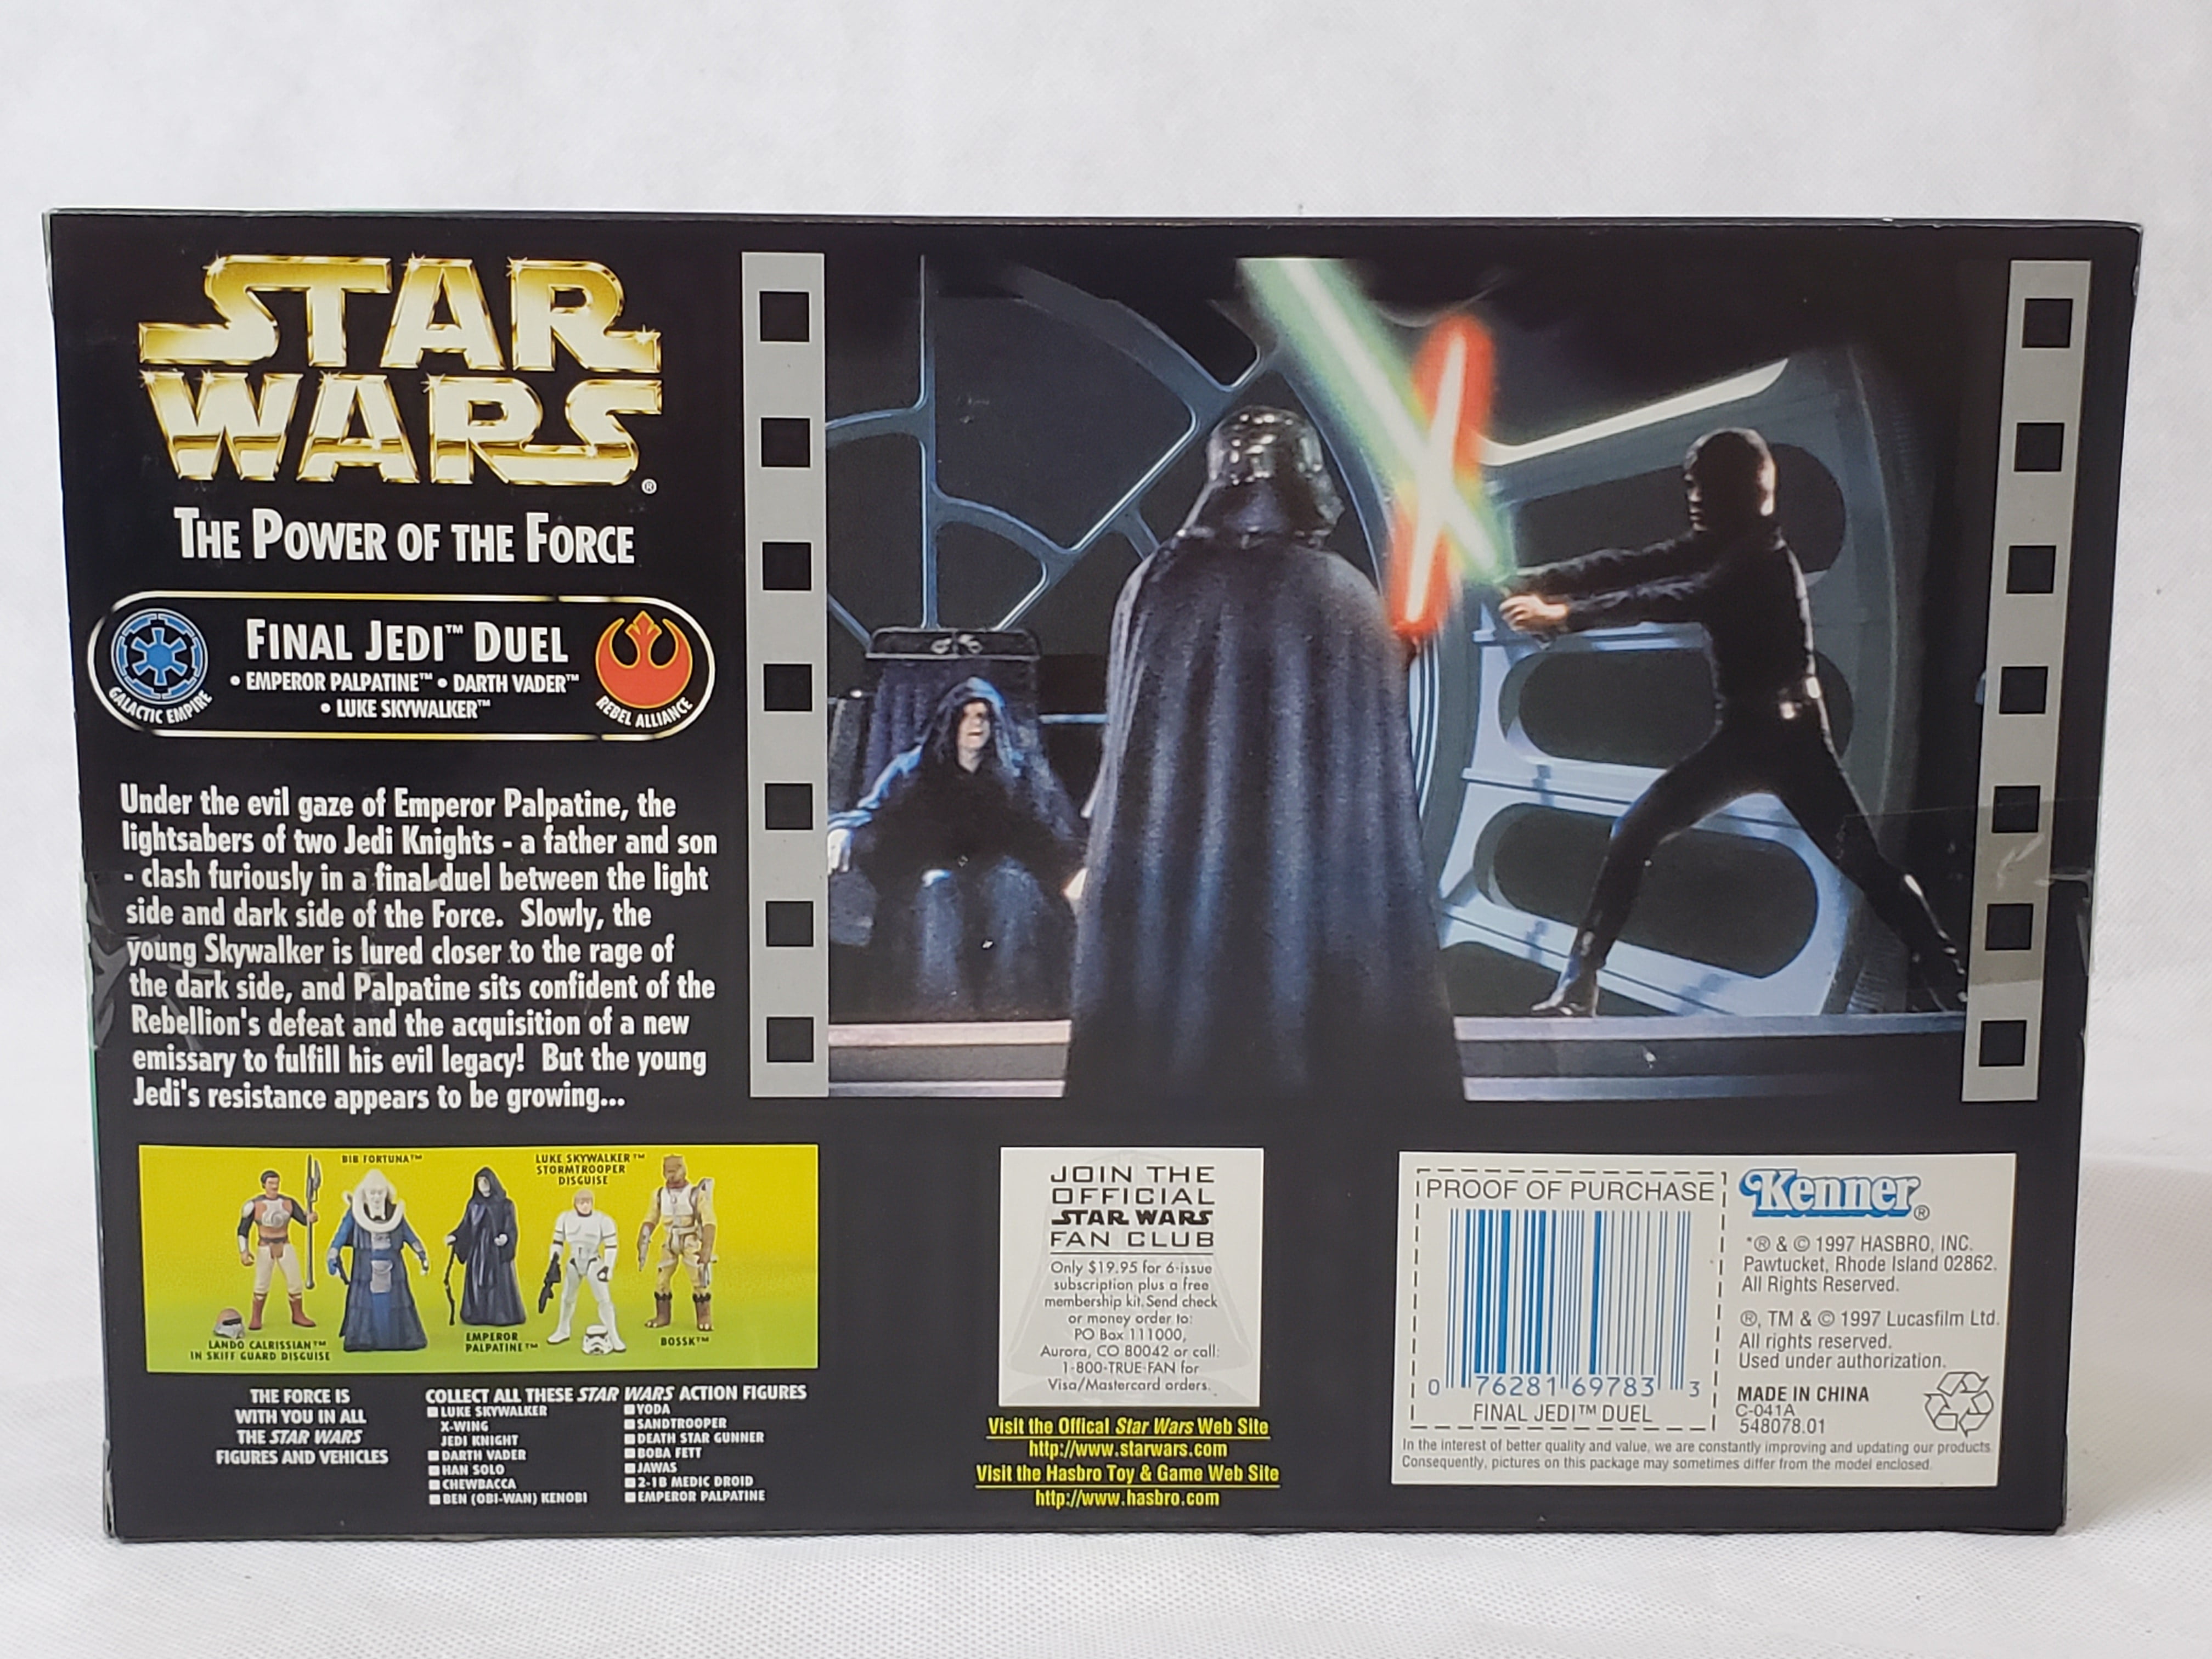 DARTH VADER FINAL JEDI DUEL Star Wars Power Of The Force 2 1997 